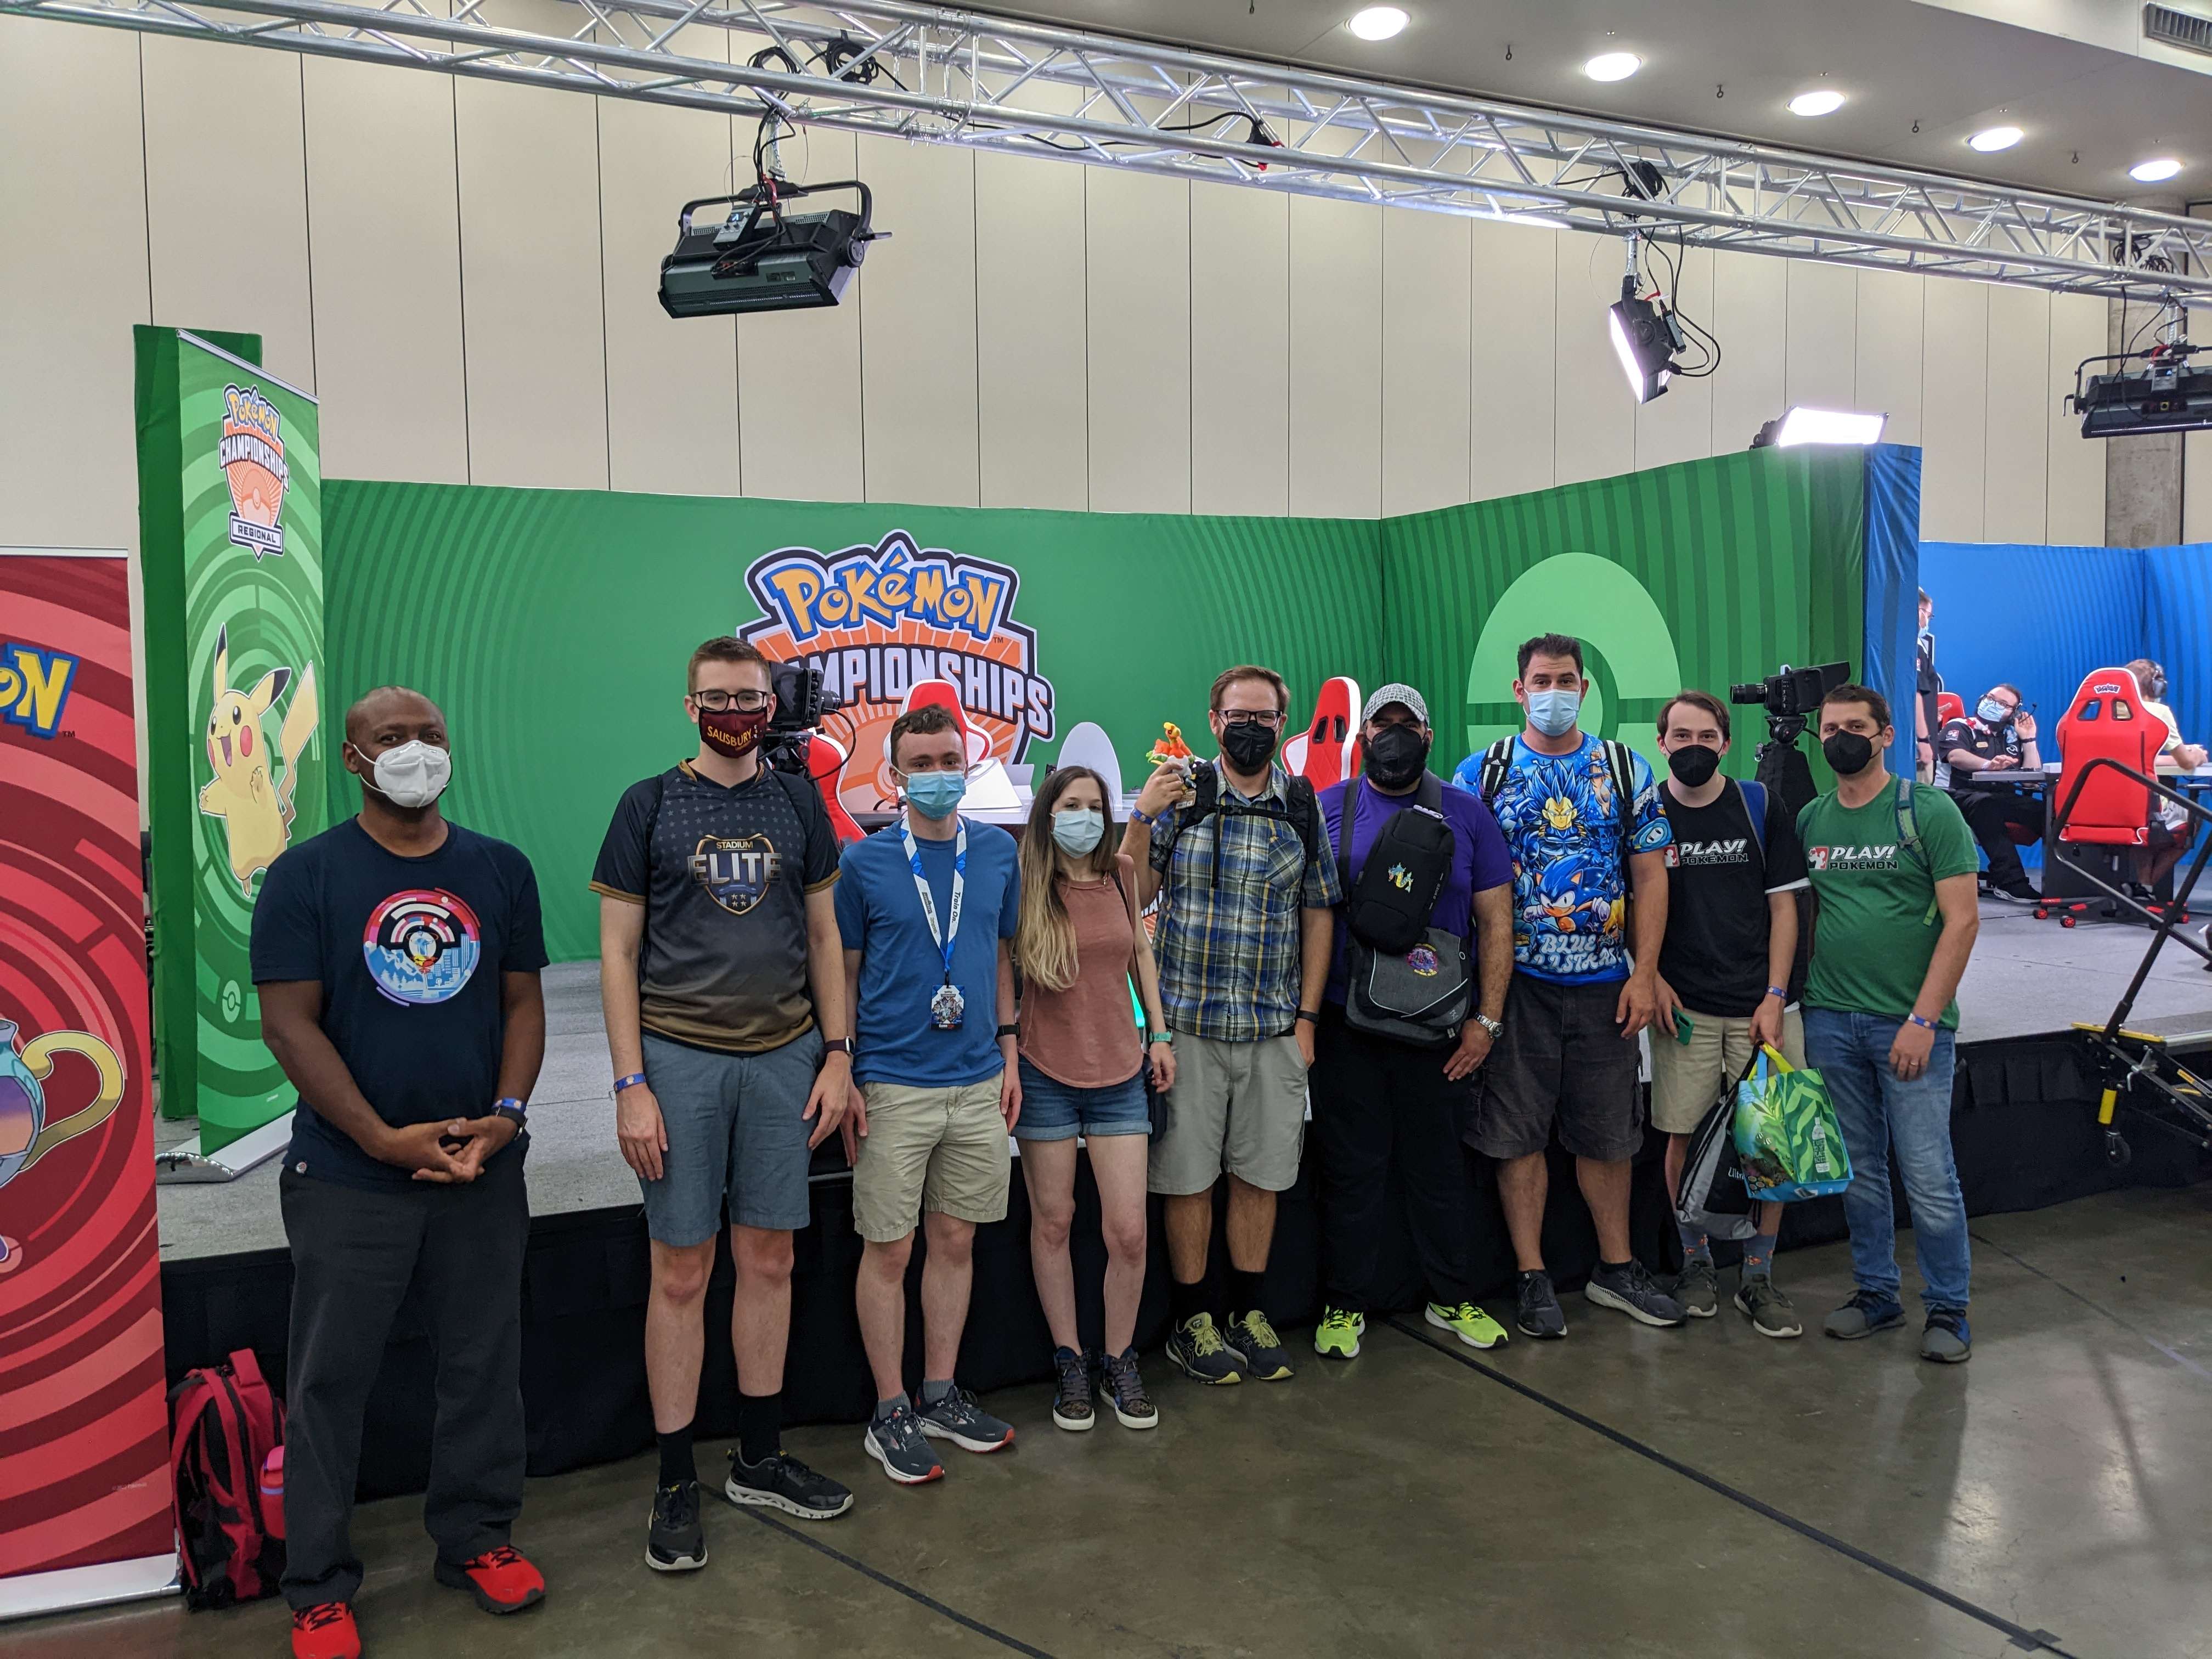 Group Photo from a Pokemon Go Tournament